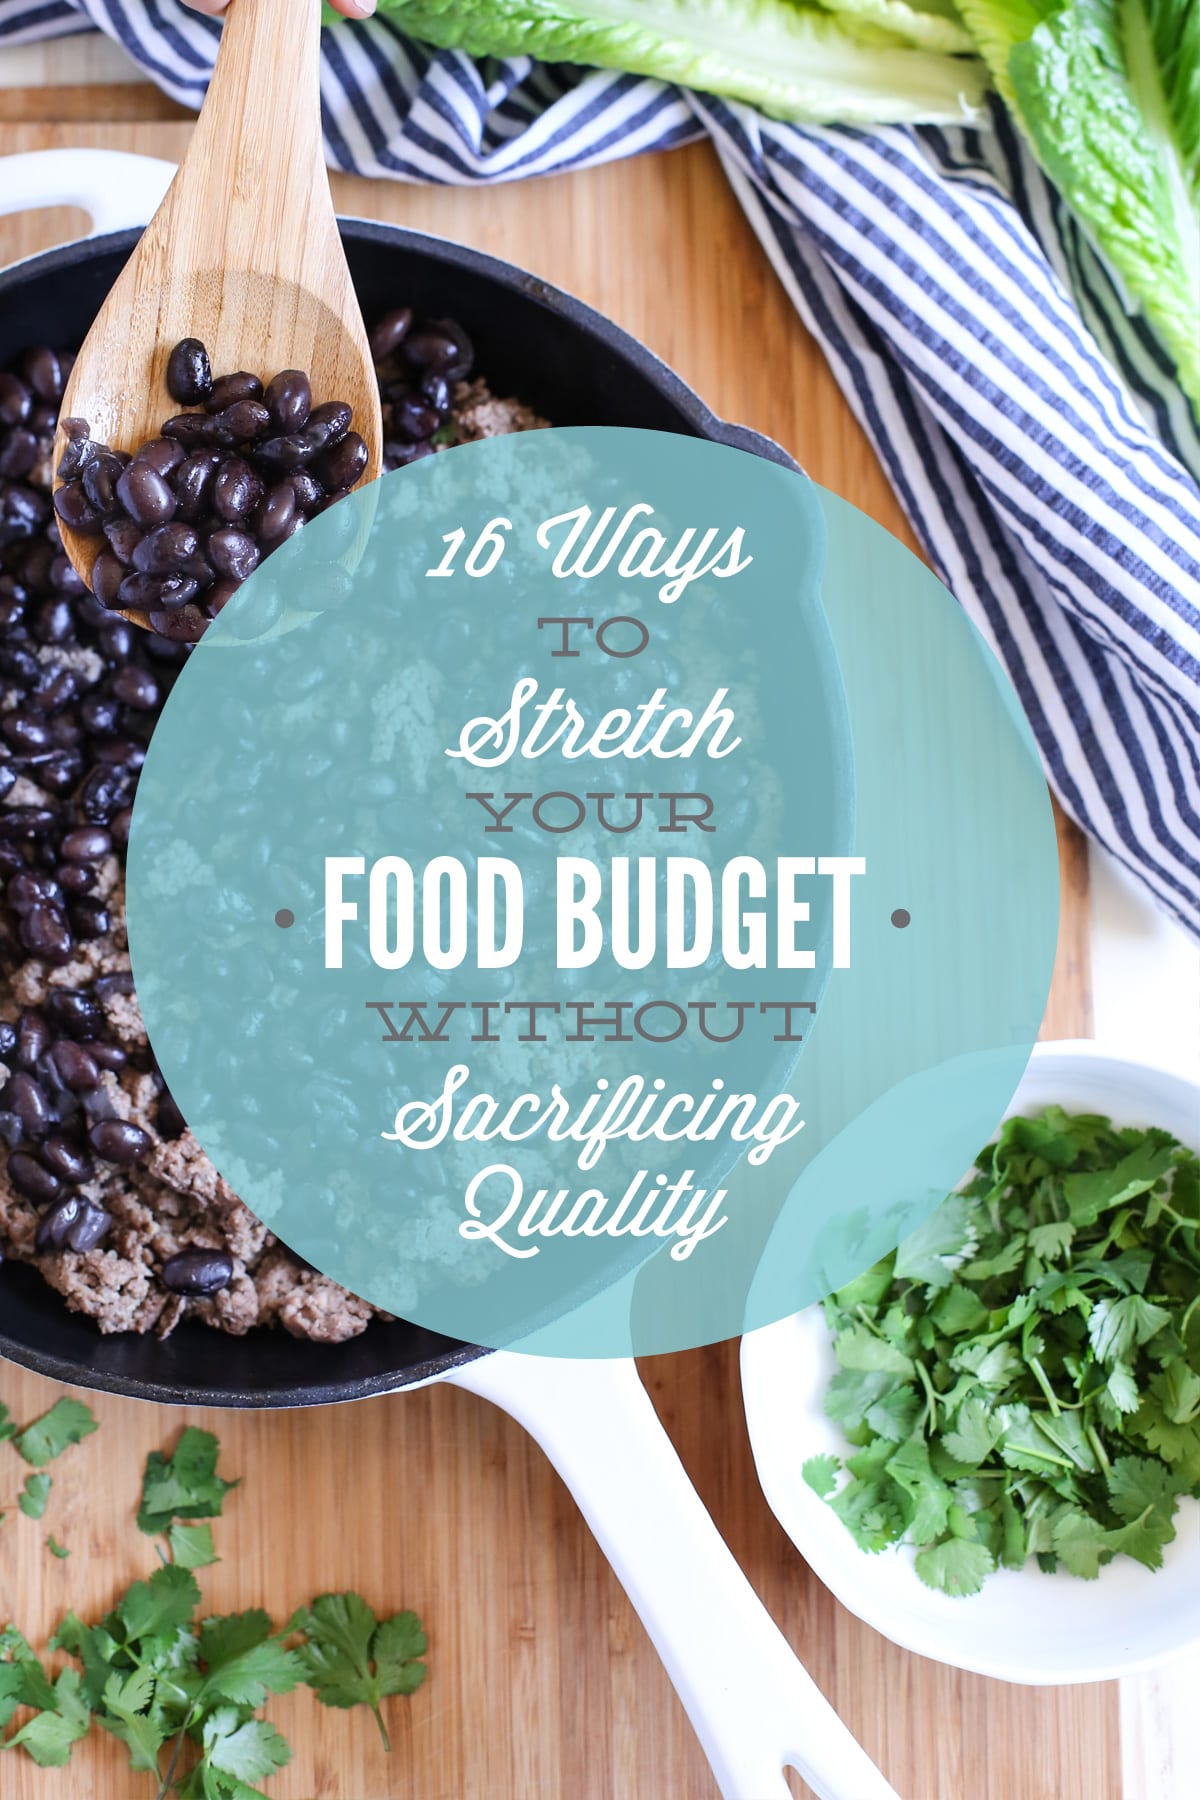 16 Ways to Stretch Your Food Budget Without Sacrificing Quality